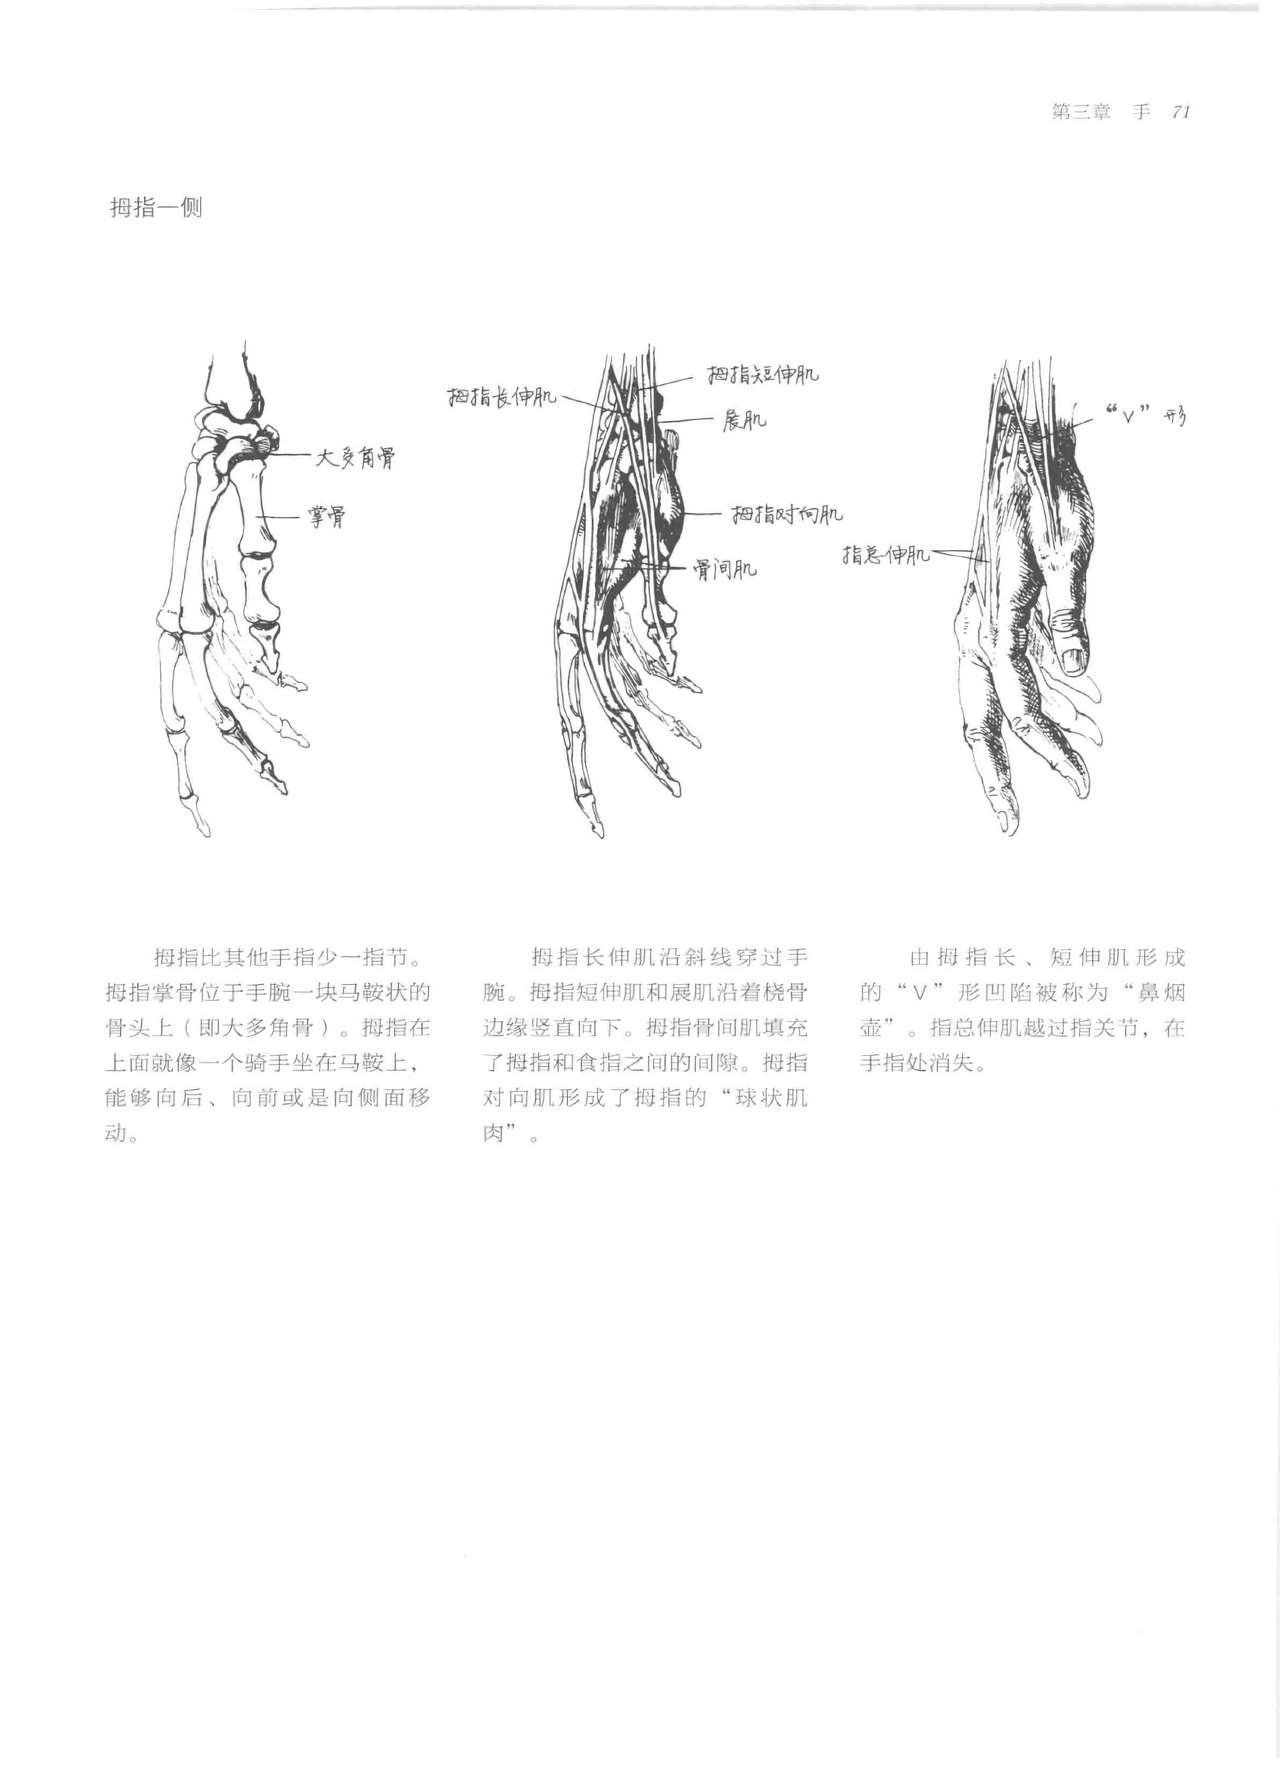 Anatomy-A Complete Guide for Artists - Joseph Sheppard [Chinese] 71